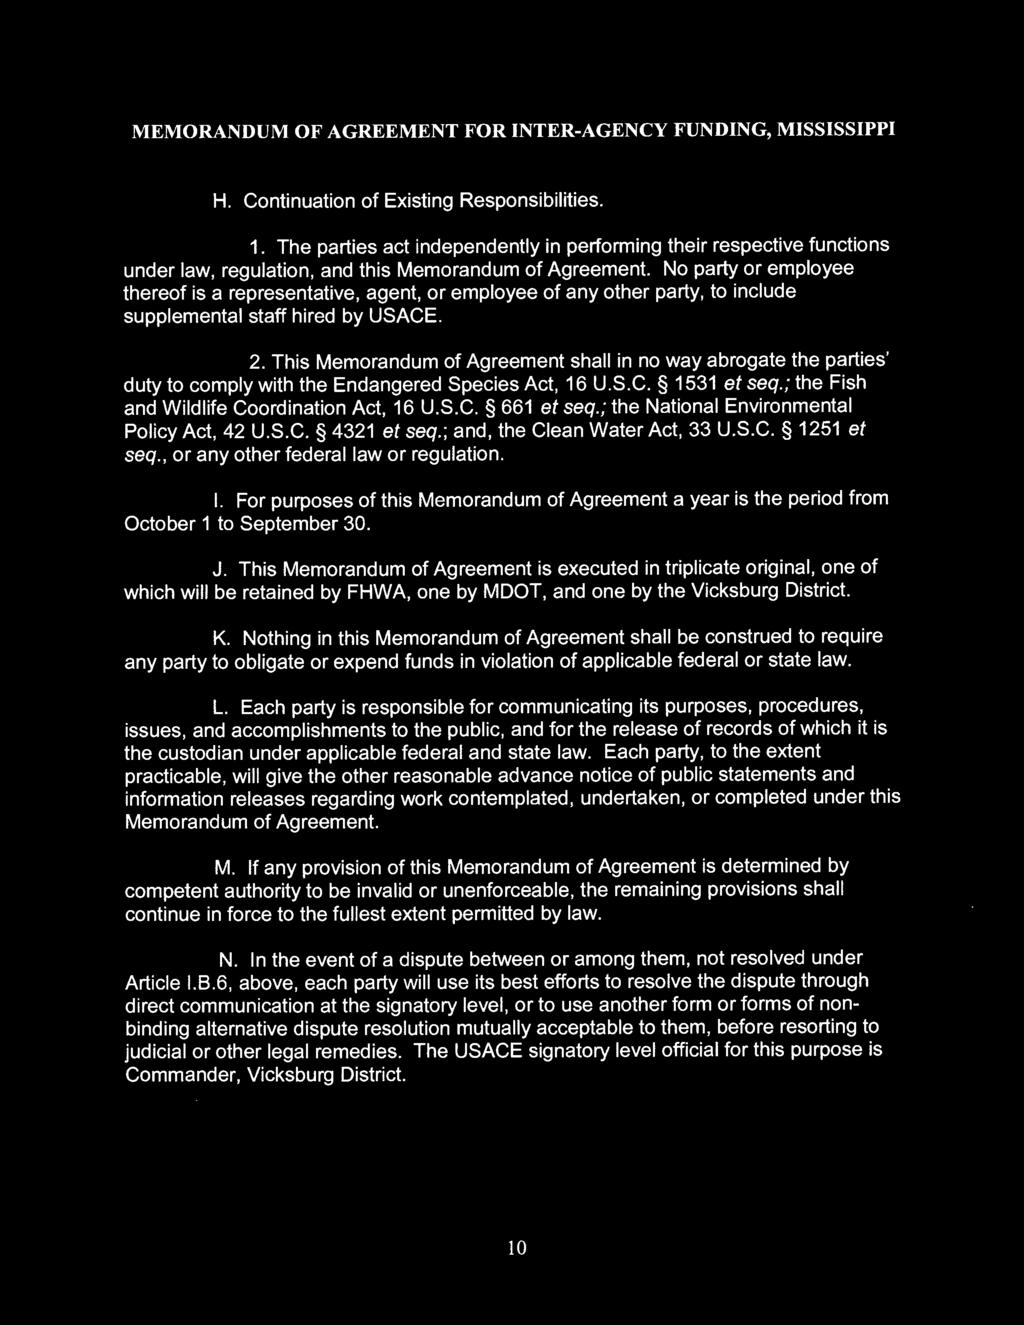 This Memorandum of Agreement shall in no way abrogate the parties' duty to comply with the Endangered Species Act, 16 U.S.C. 1531 et seq.; the Fish and Wildlife Coordination Act, 16 U.S.C. 661 et seq.